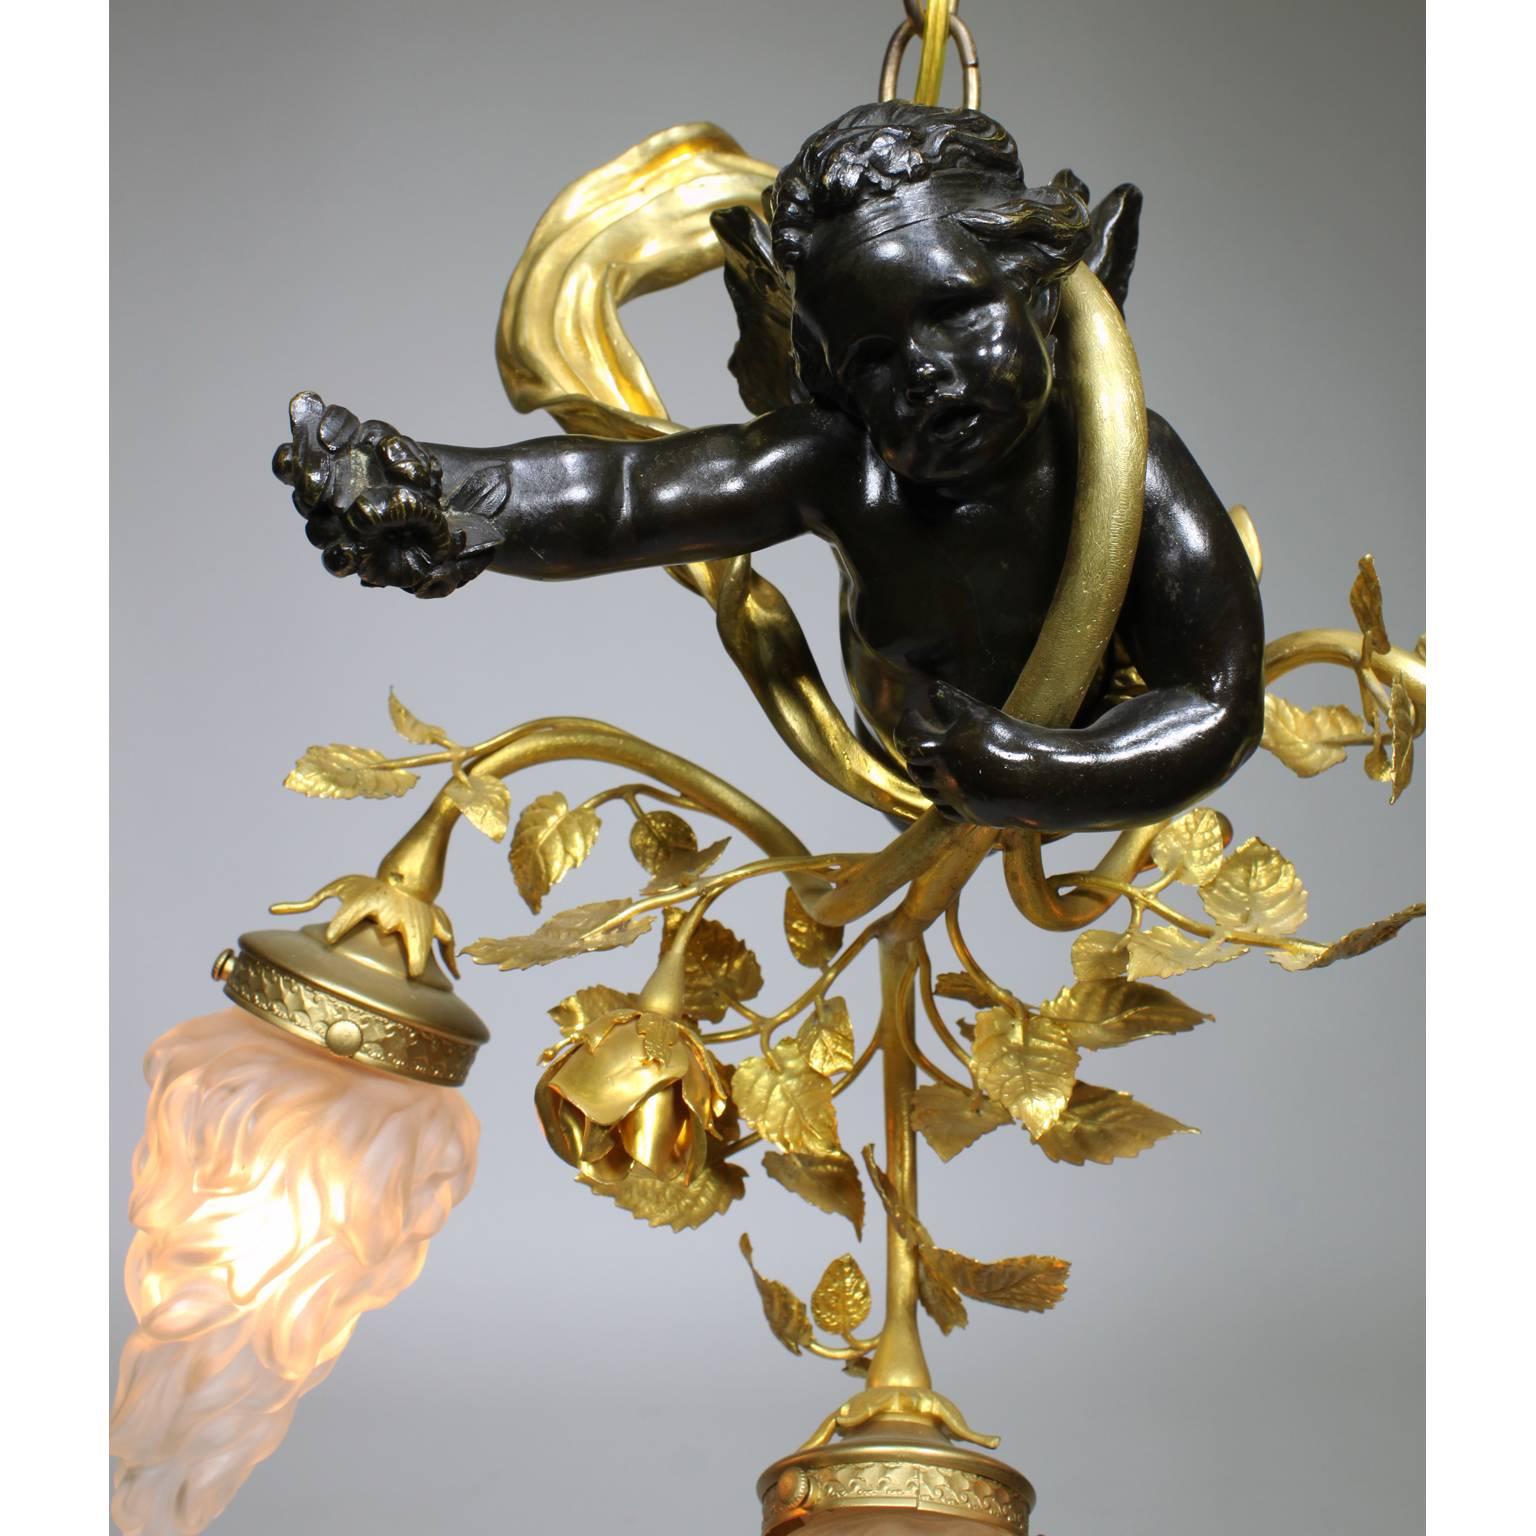 A fine French 19th-20th century Belle Époque three light patinated, gilt bronze and gilt-metal figural chandelier pendant. The dark patinated bronze figure of a hovering cherub enwrapped around a blowing gilt bronze ribbon while holding a